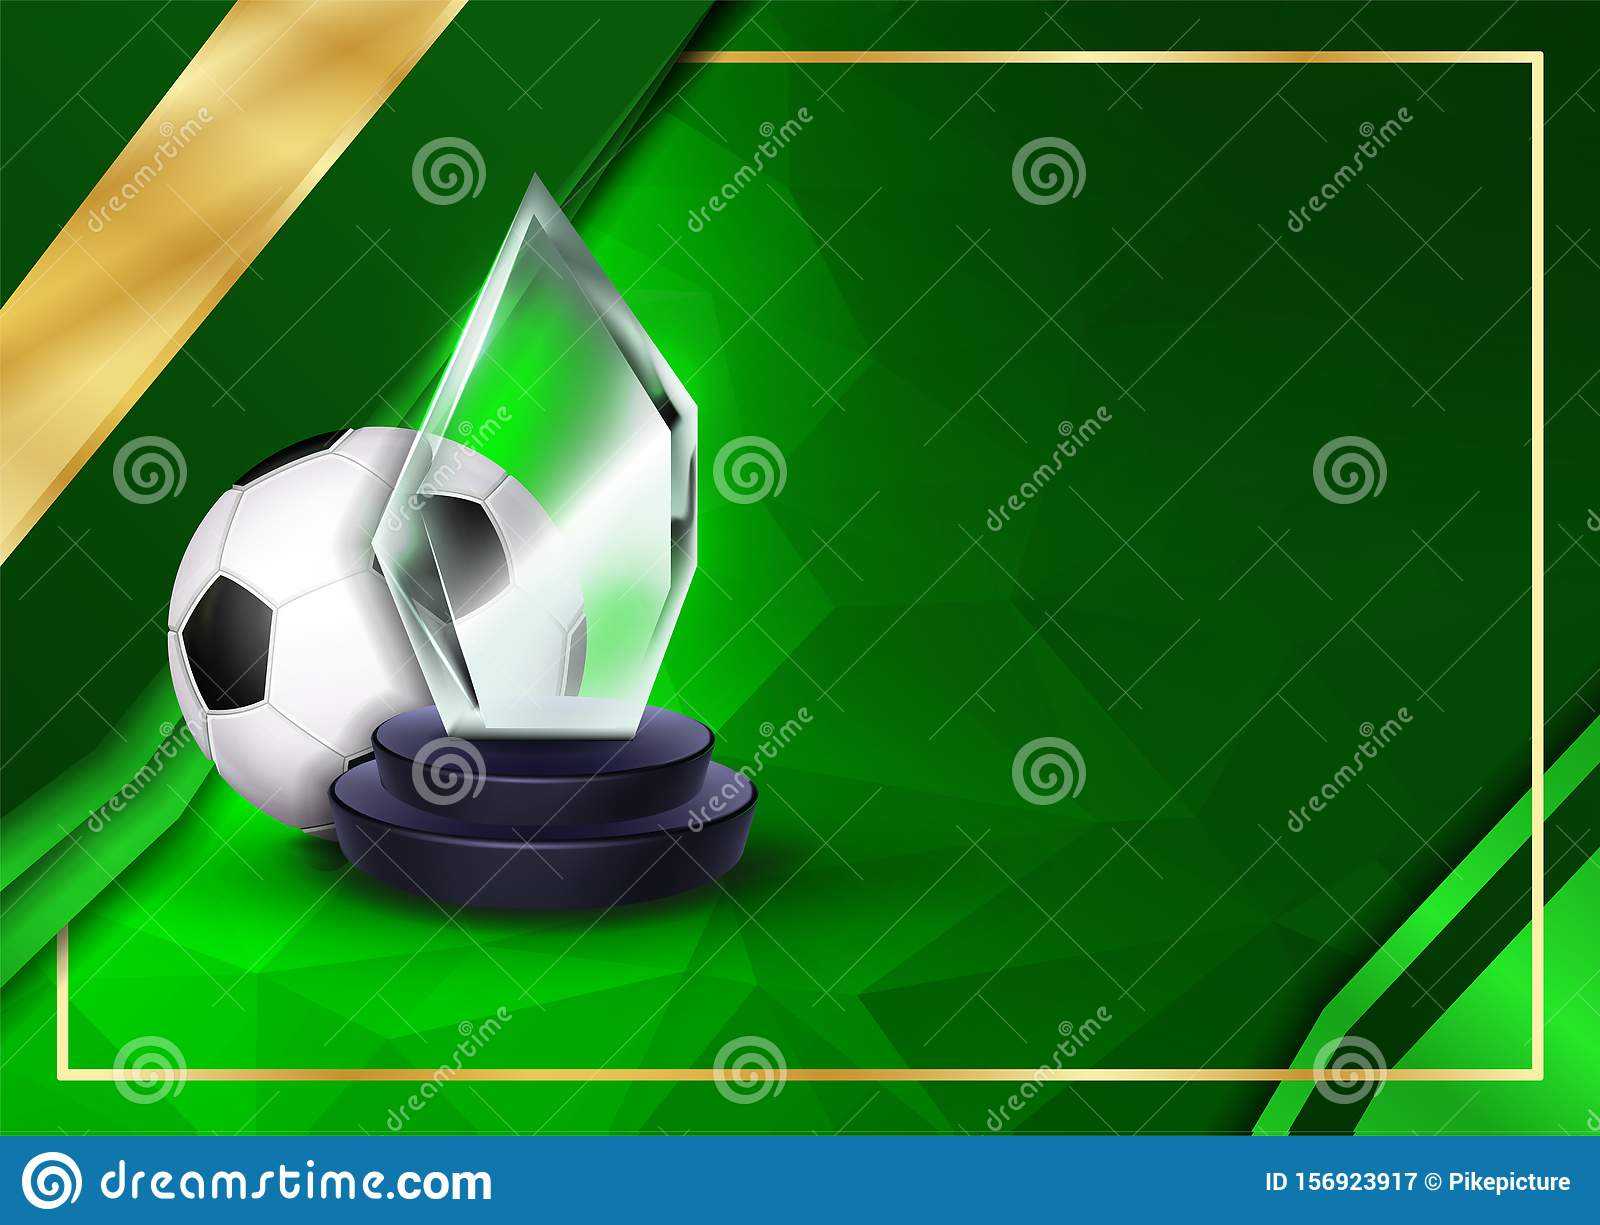 Soccer Certificate Diploma With Glass Trophy Vector. Sport Pertaining To Soccer Award Certificate Template